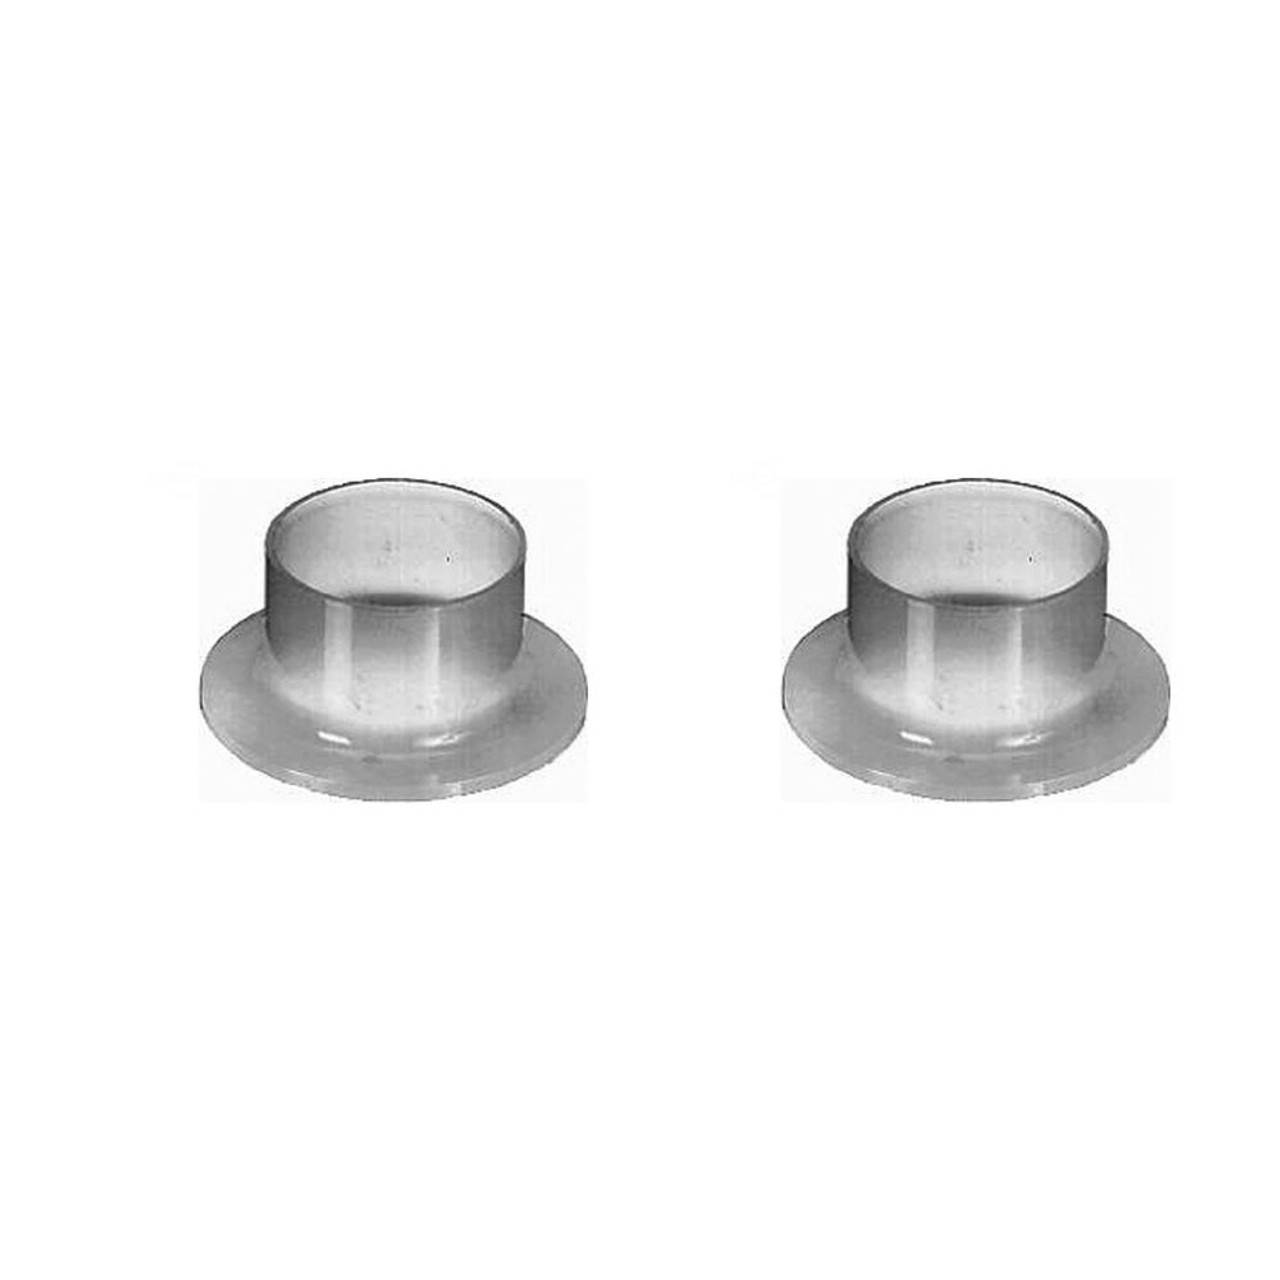 (2) King Pin Bushings 3/4 X 13/16 for Snapper 10986 7010986, 7010986YP